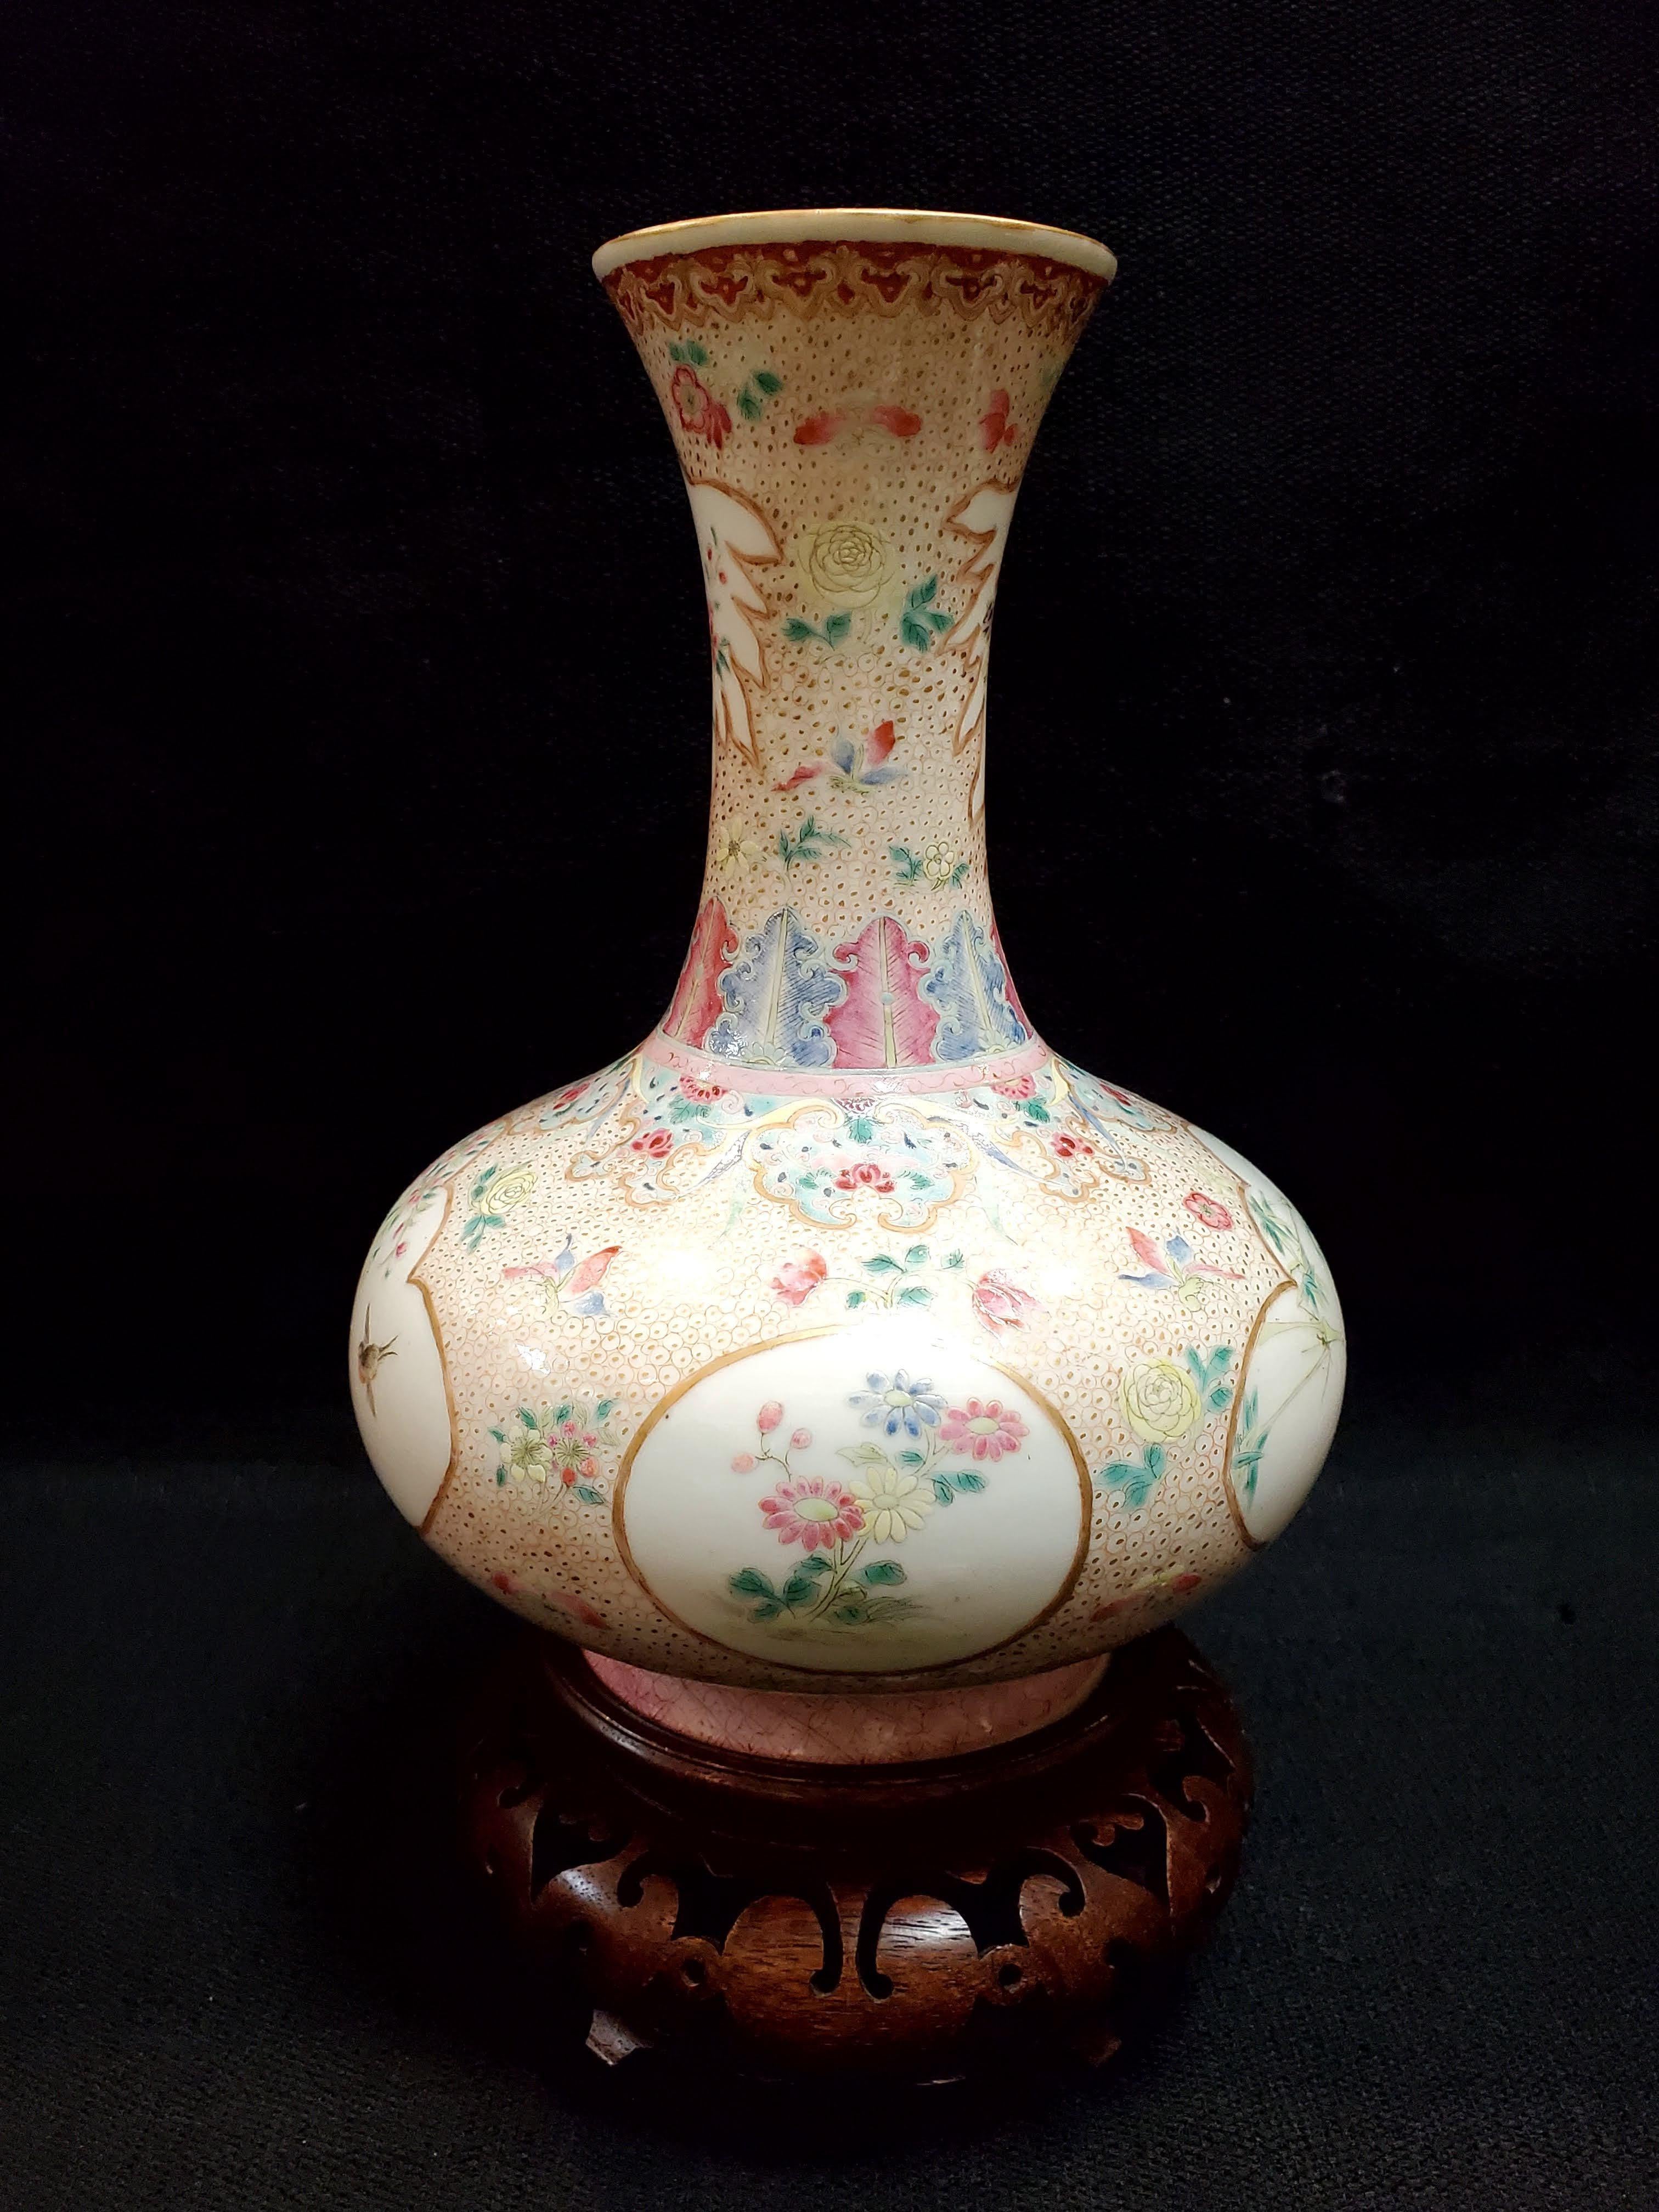 Antique Chinese Qing delicate famille rose floral ornament porcelain vase. ????????????
Condition: Shows normal sign of wear and use, No damage or crack. 
Approximate size: H: 8 inch, W: 5 inch, diameter of rim: 7 cm. Please refer the size and